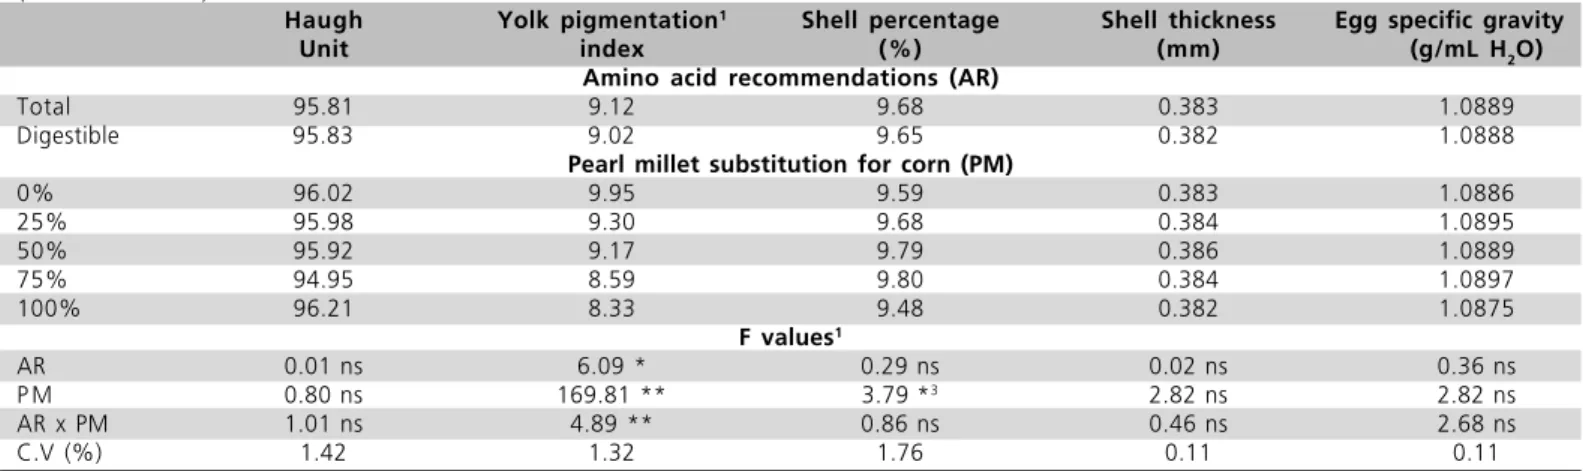 Table 5- Egg quality of laying hens fed diets formulated on a total or digestible amino acid basis and with increasing levels of pearl millet (25 to 45 weeks).